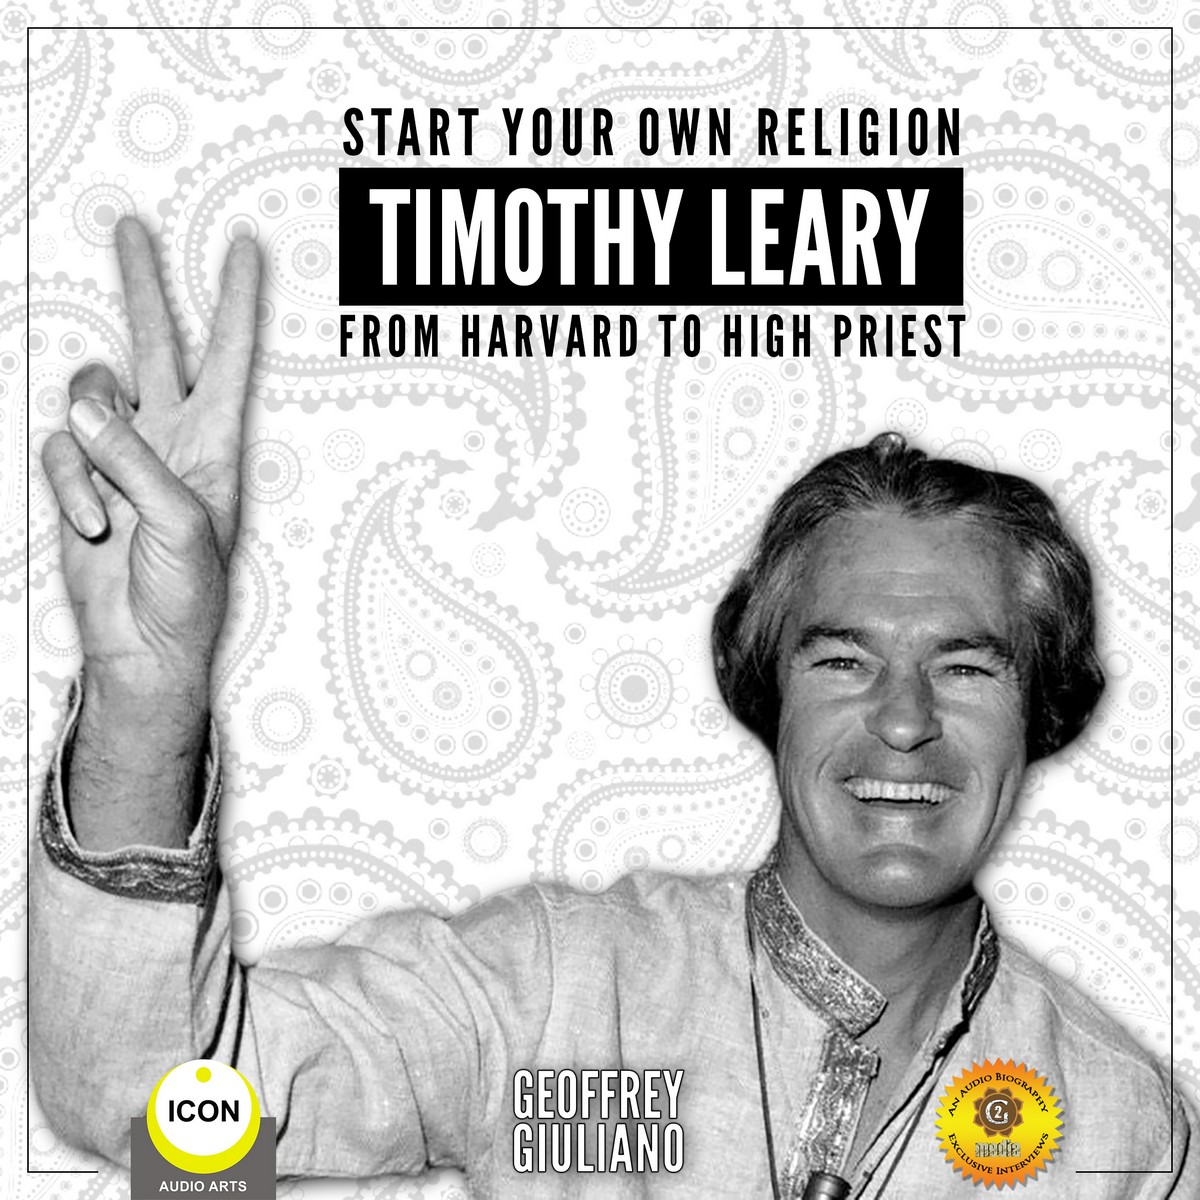 Start Your Own Religion Timothy Leary – From Harvard to High Priest